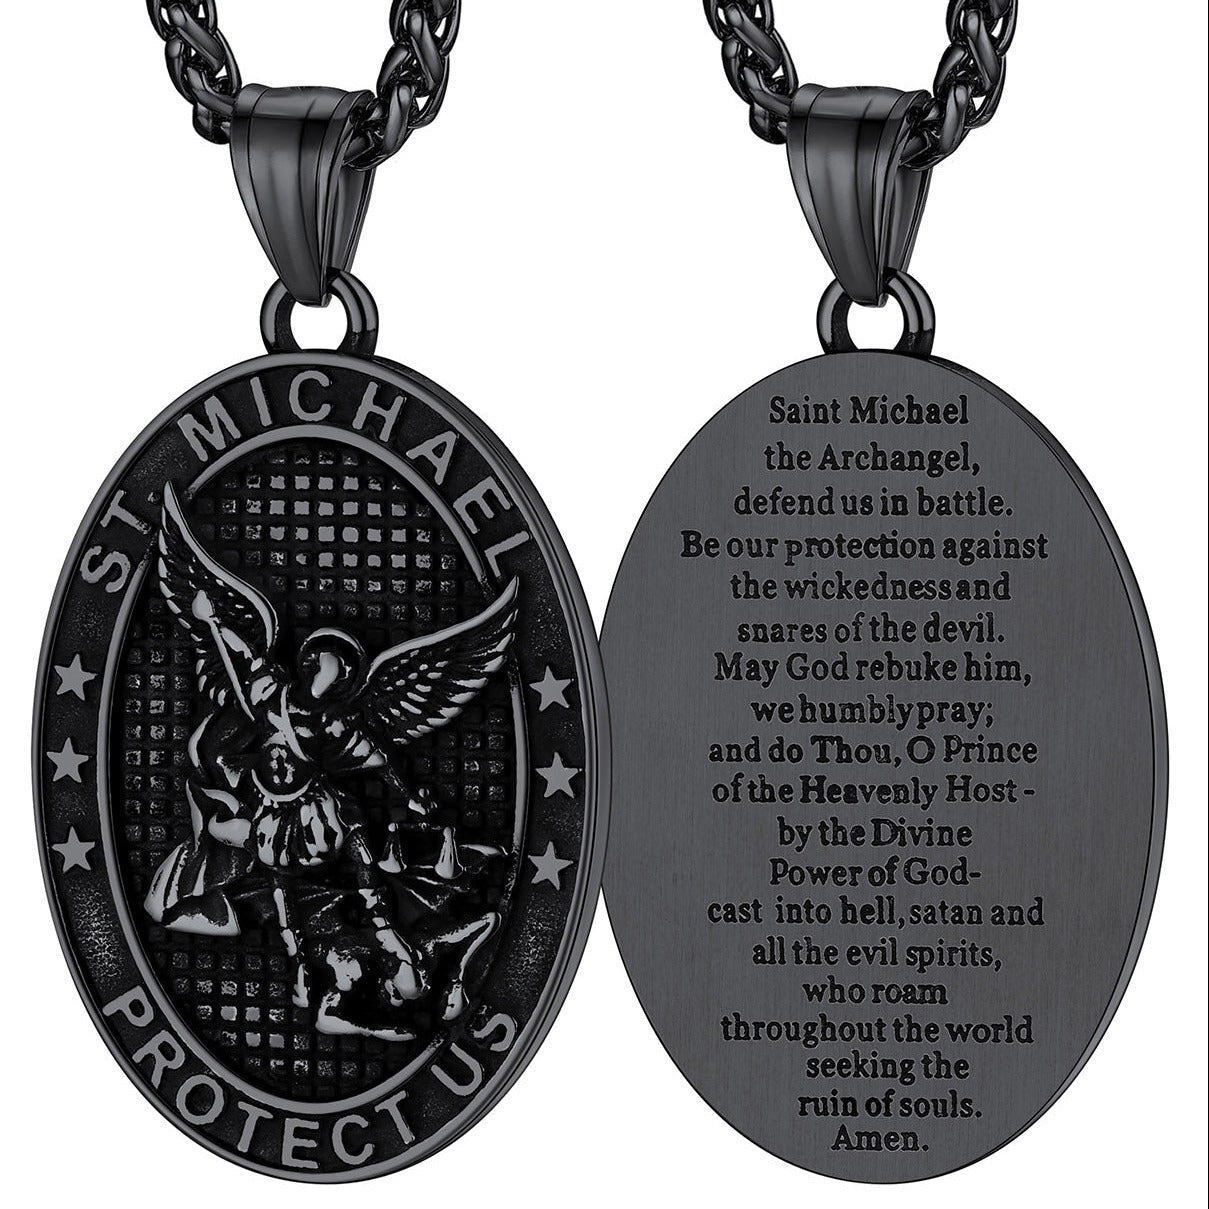 Oval Archangel Saint Michael Necklace Medal FaithHeart Jewelry